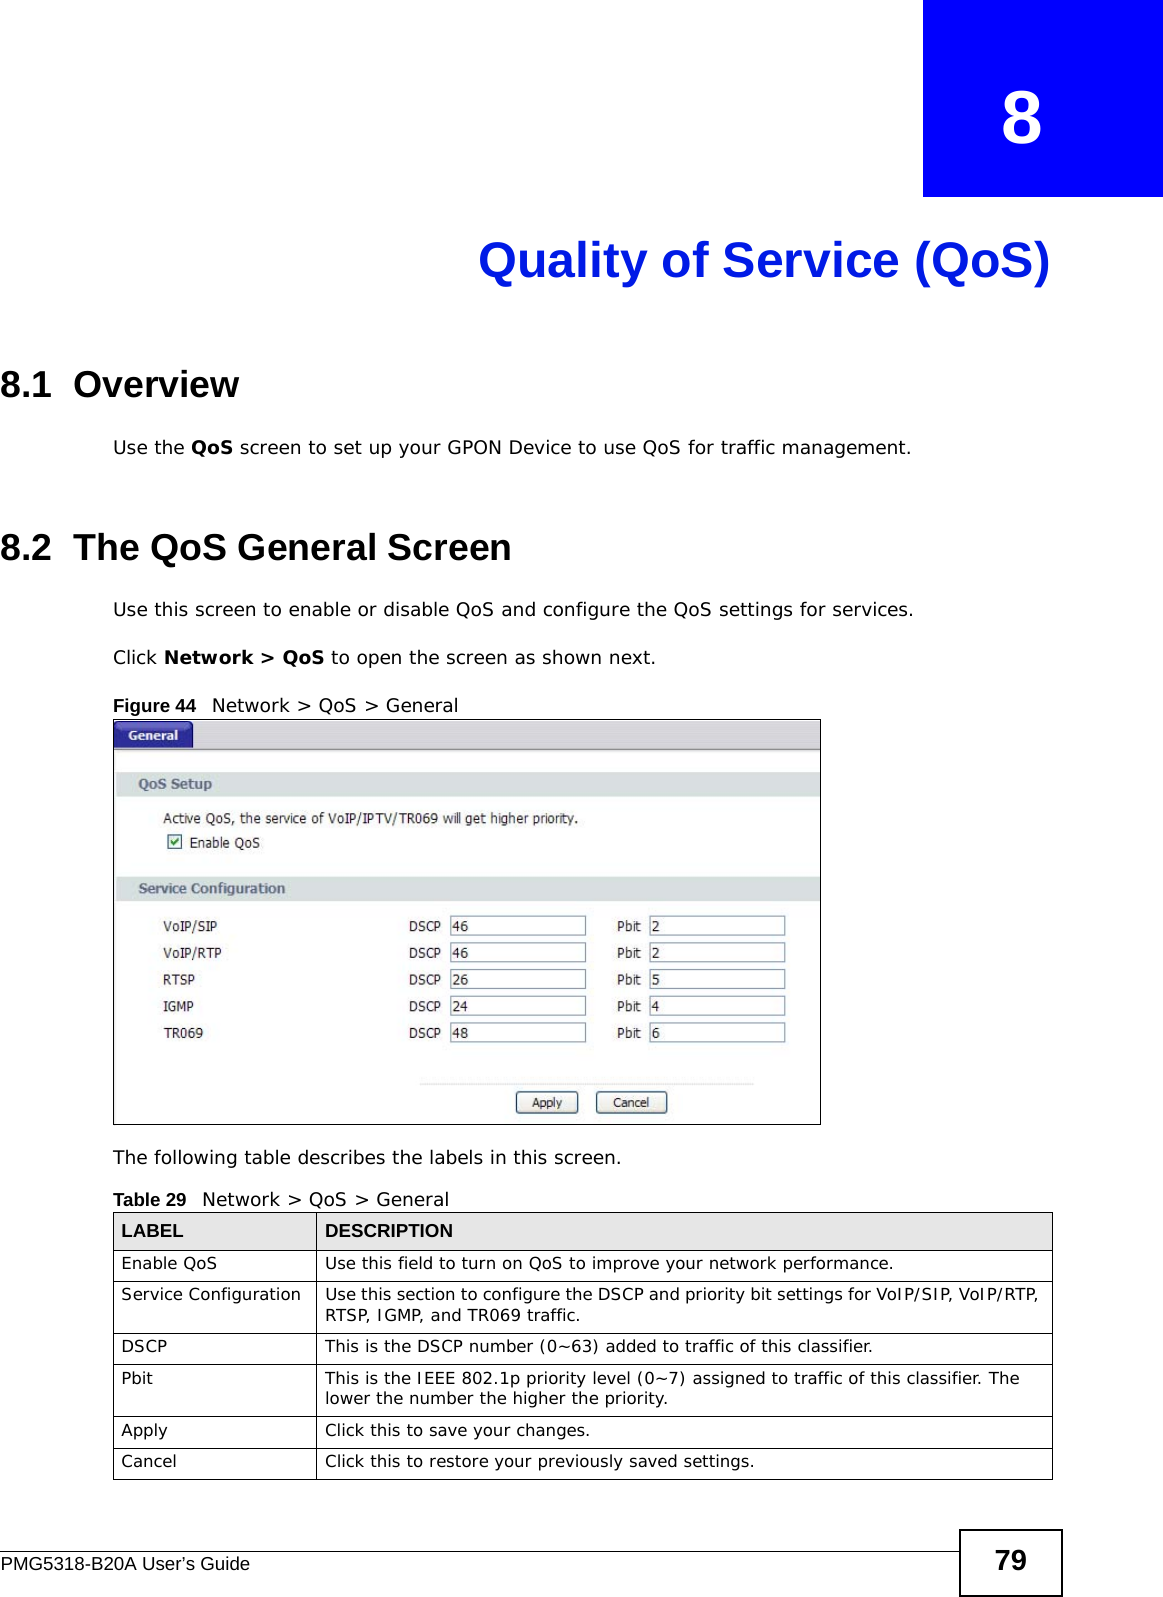 PMG5318-B20A User’s Guide 79CHAPTER   8Quality of Service (QoS)8.1  OverviewUse the QoS screen to set up your GPON Device to use QoS for traffic management. 8.2  The QoS General ScreenUse this screen to enable or disable QoS and configure the QoS settings for services.Click Network &gt; QoS to open the screen as shown next.Figure 44   Network &gt; QoS &gt; GeneralThe following table describes the labels in this screen. Table 29   Network &gt; QoS &gt; GeneralLABEL DESCRIPTIONEnable QoS Use this field to turn on QoS to improve your network performance.Service Configuration Use this section to configure the DSCP and priority bit settings for VoIP/SIP, VoIP/RTP, RTSP, IGMP, and TR069 traffic.DSCP This is the DSCP number (0~63) added to traffic of this classifier.Pbit This is the IEEE 802.1p priority level (0~7) assigned to traffic of this classifier. The lower the number the higher the priority.Apply Click this to save your changes.Cancel Click this to restore your previously saved settings.